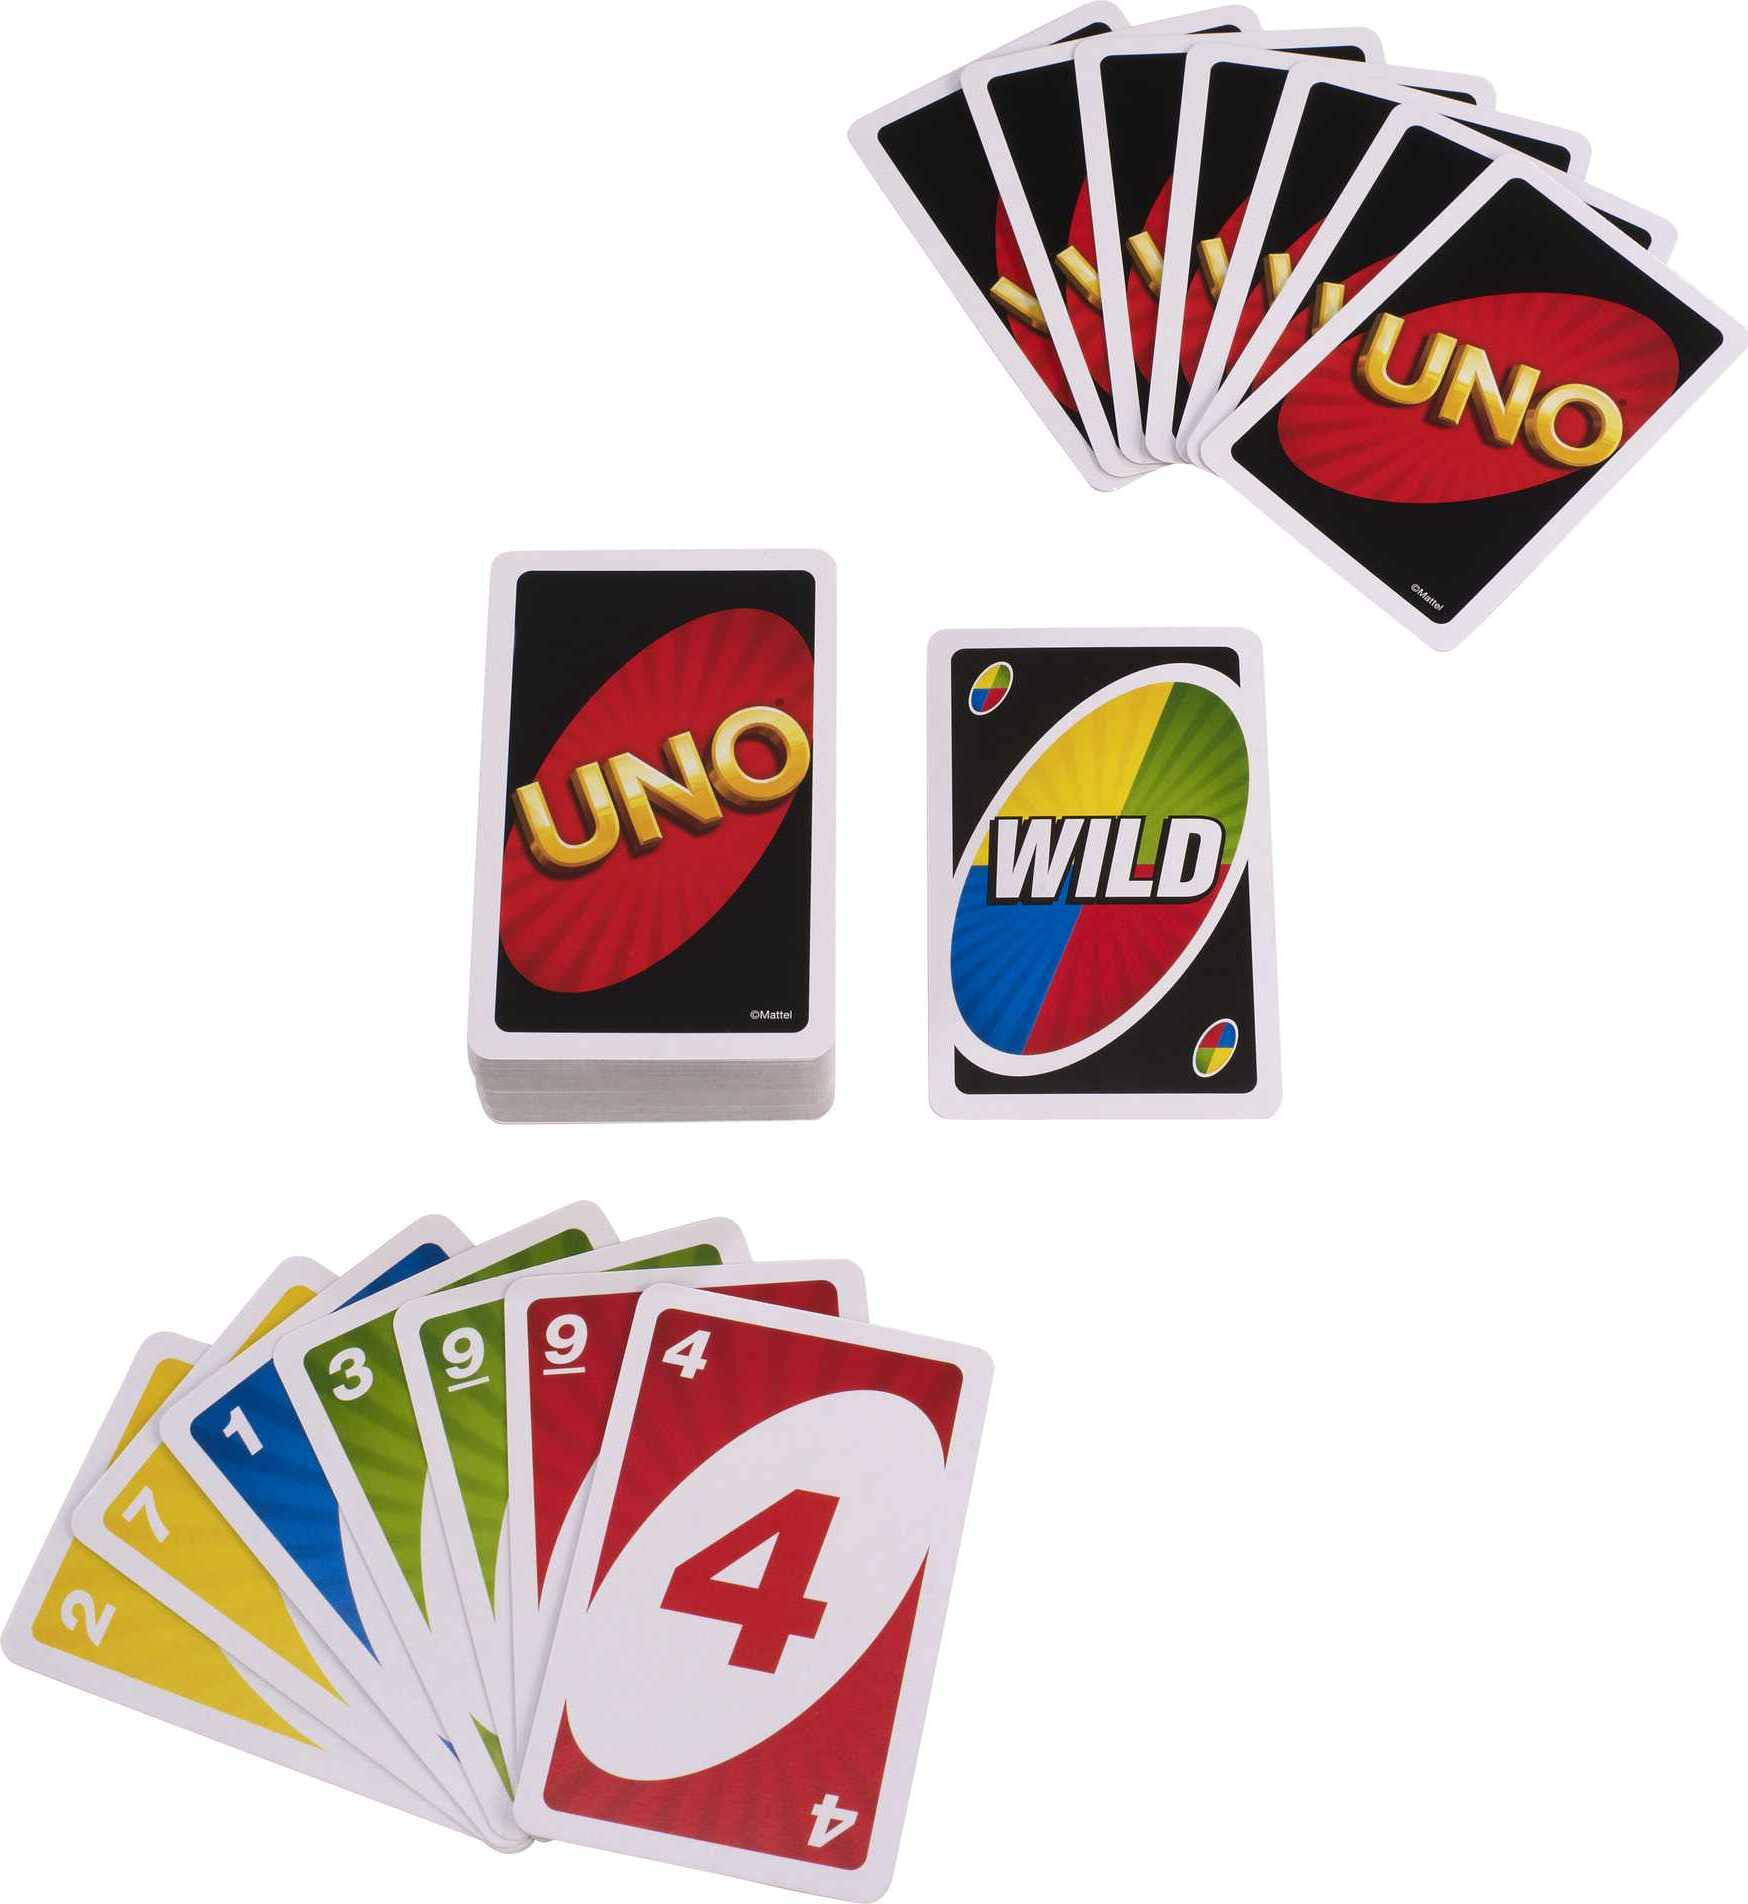 UNO Card Game for Kids, Adults & Family Game Night, Original UNO Game of Matching Colors & Numbers - image 4 of 7